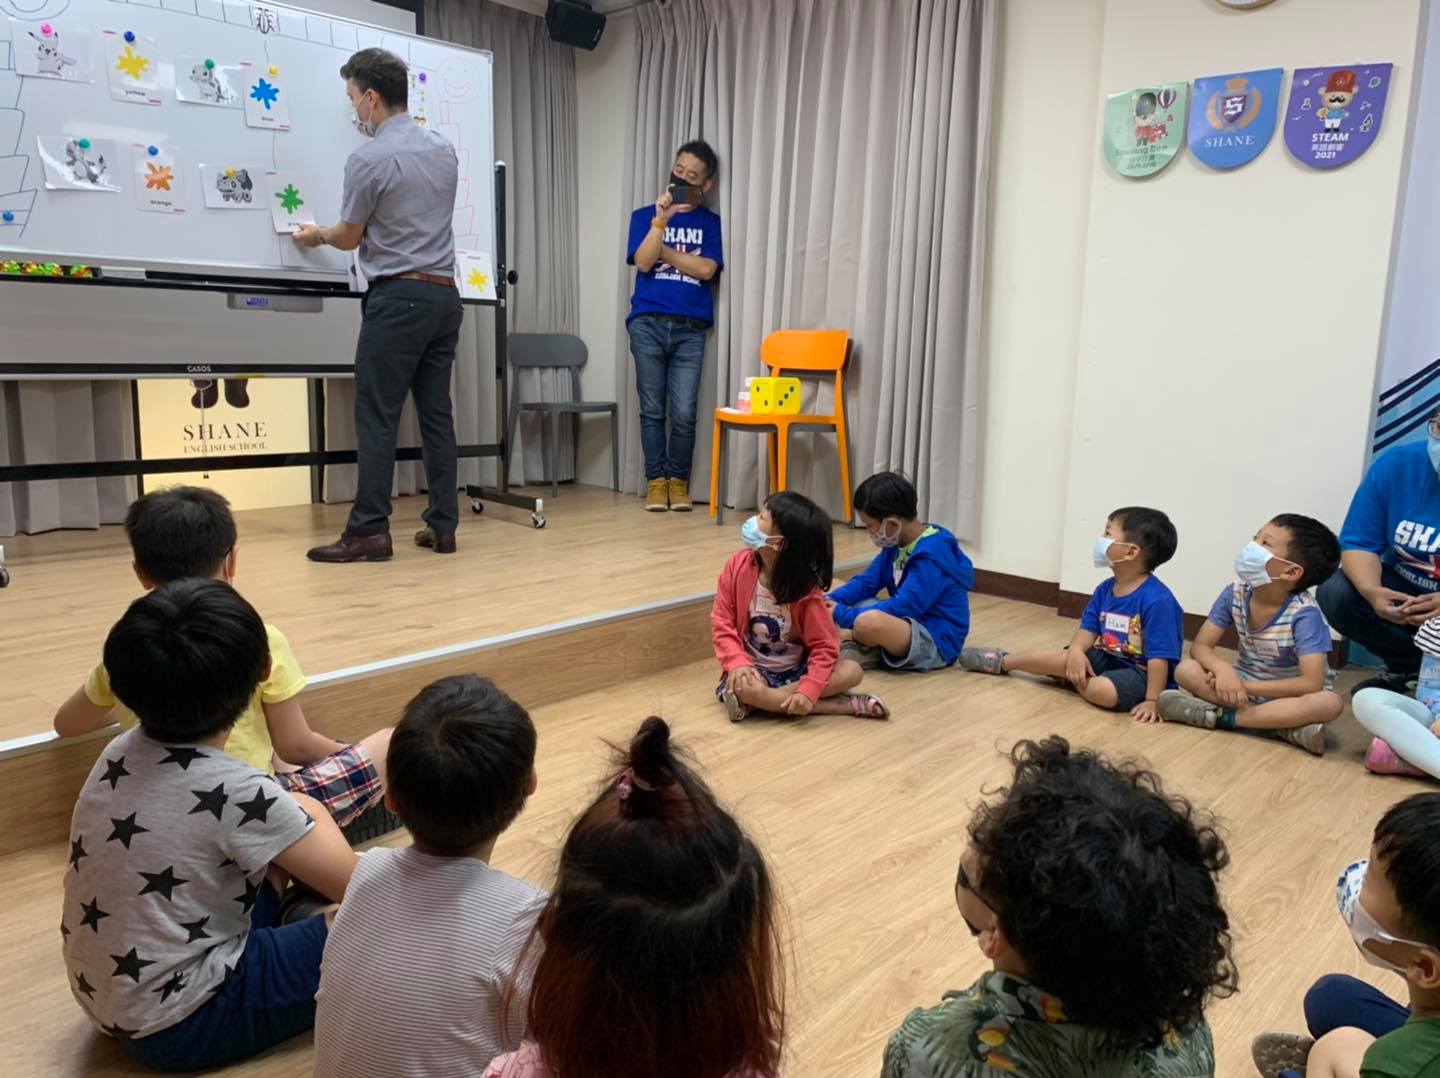 Teaching English and Living in Taiwan Jobs Available 教學工作, Shane English School Taiwan EFL Writer & English Teacher Positions (throughout Taiwan) available at Shane image